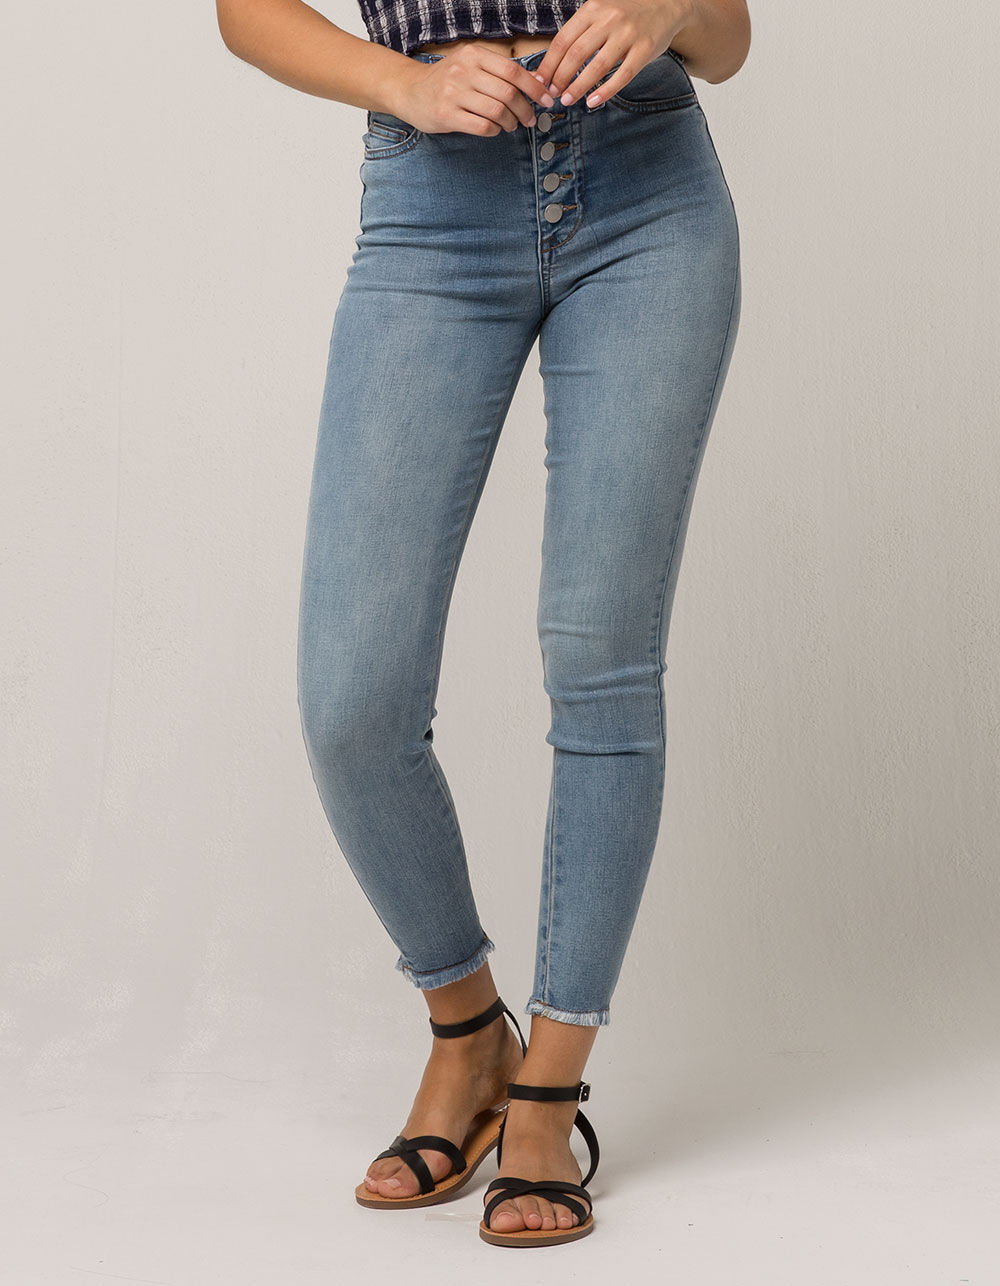 IVY & MAIN Exposed Button Crop Womens Skinny Jeans - LIGHT WASH | Tillys